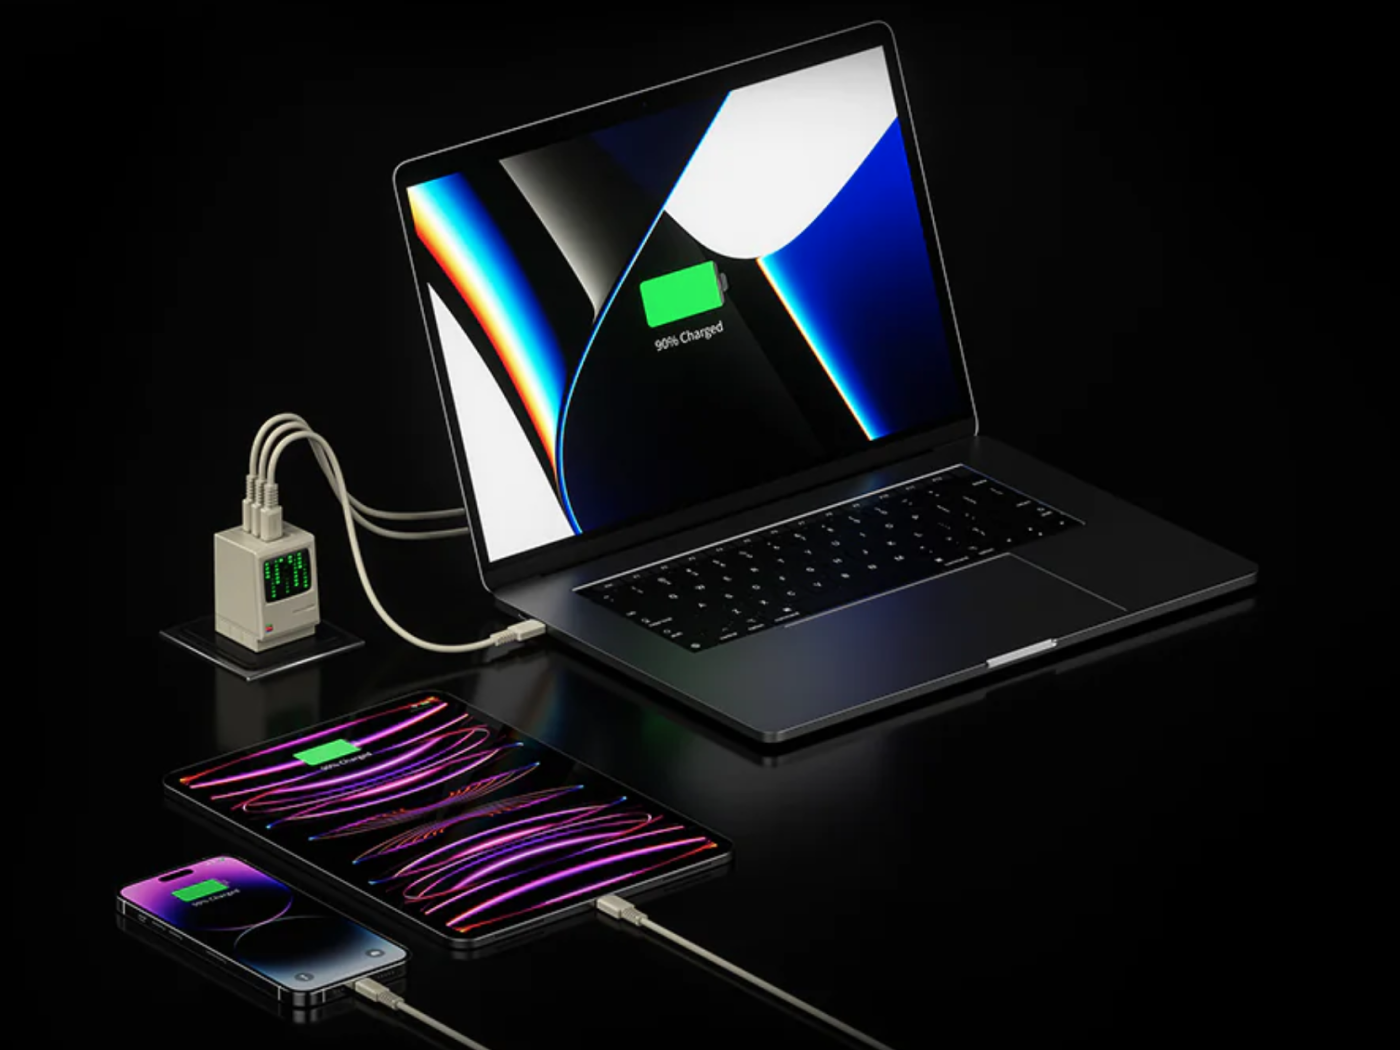 Shargeek 3 USB-C Multiple Output Charger